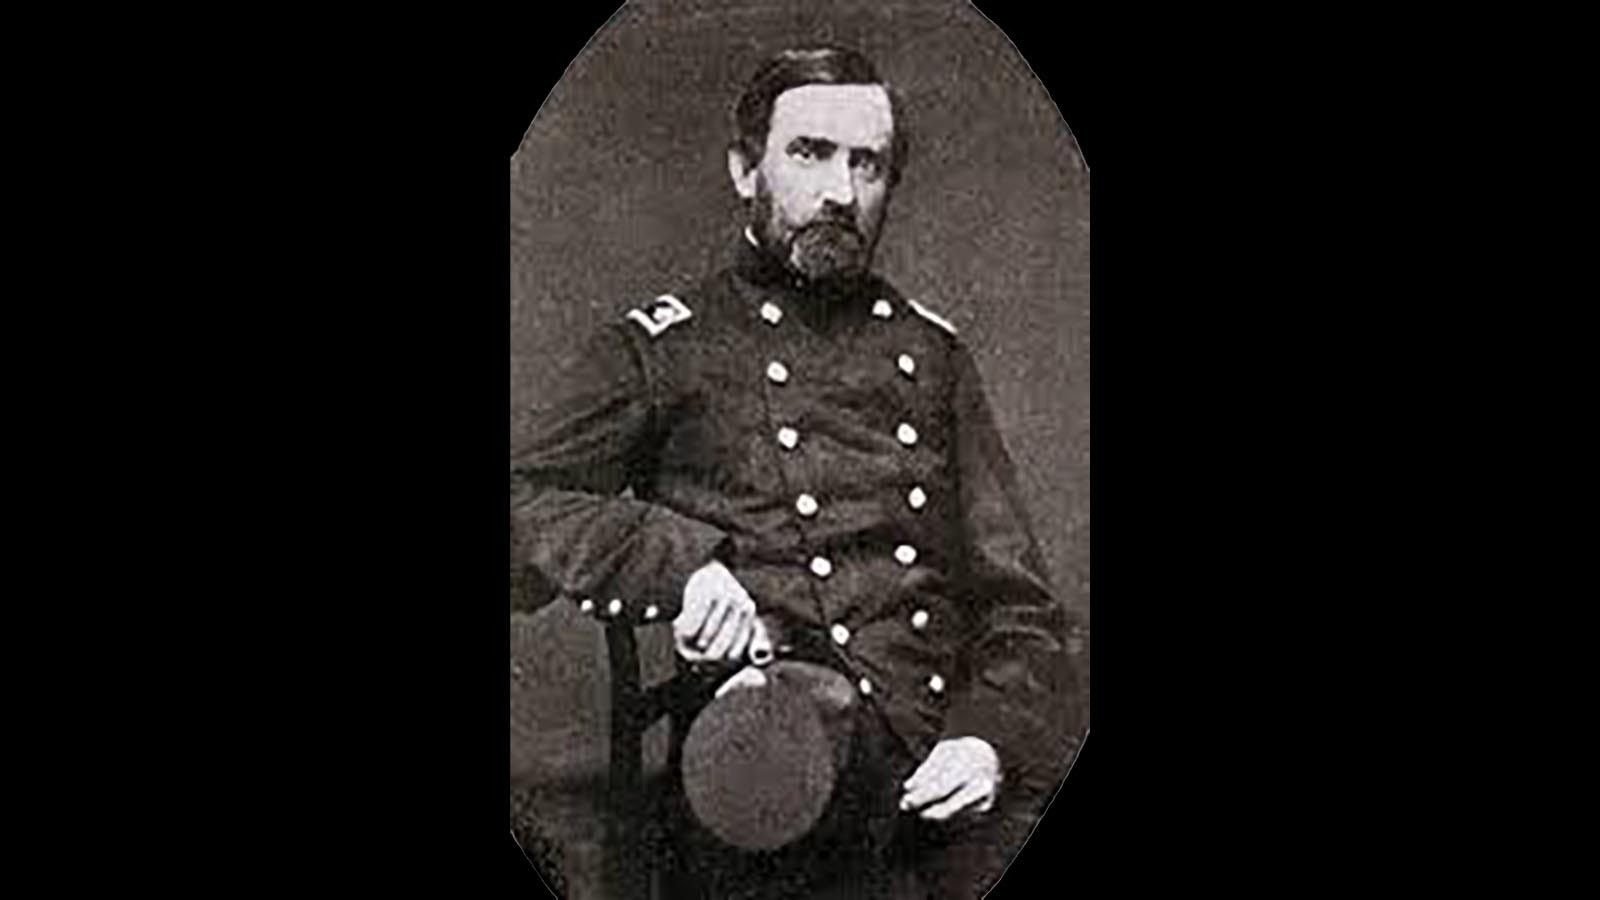 Lt. Col. William O. Collins, the namesake for Fort Collins, Colorado. Casper, Wyoming, is named for his son, Caspar Collins.